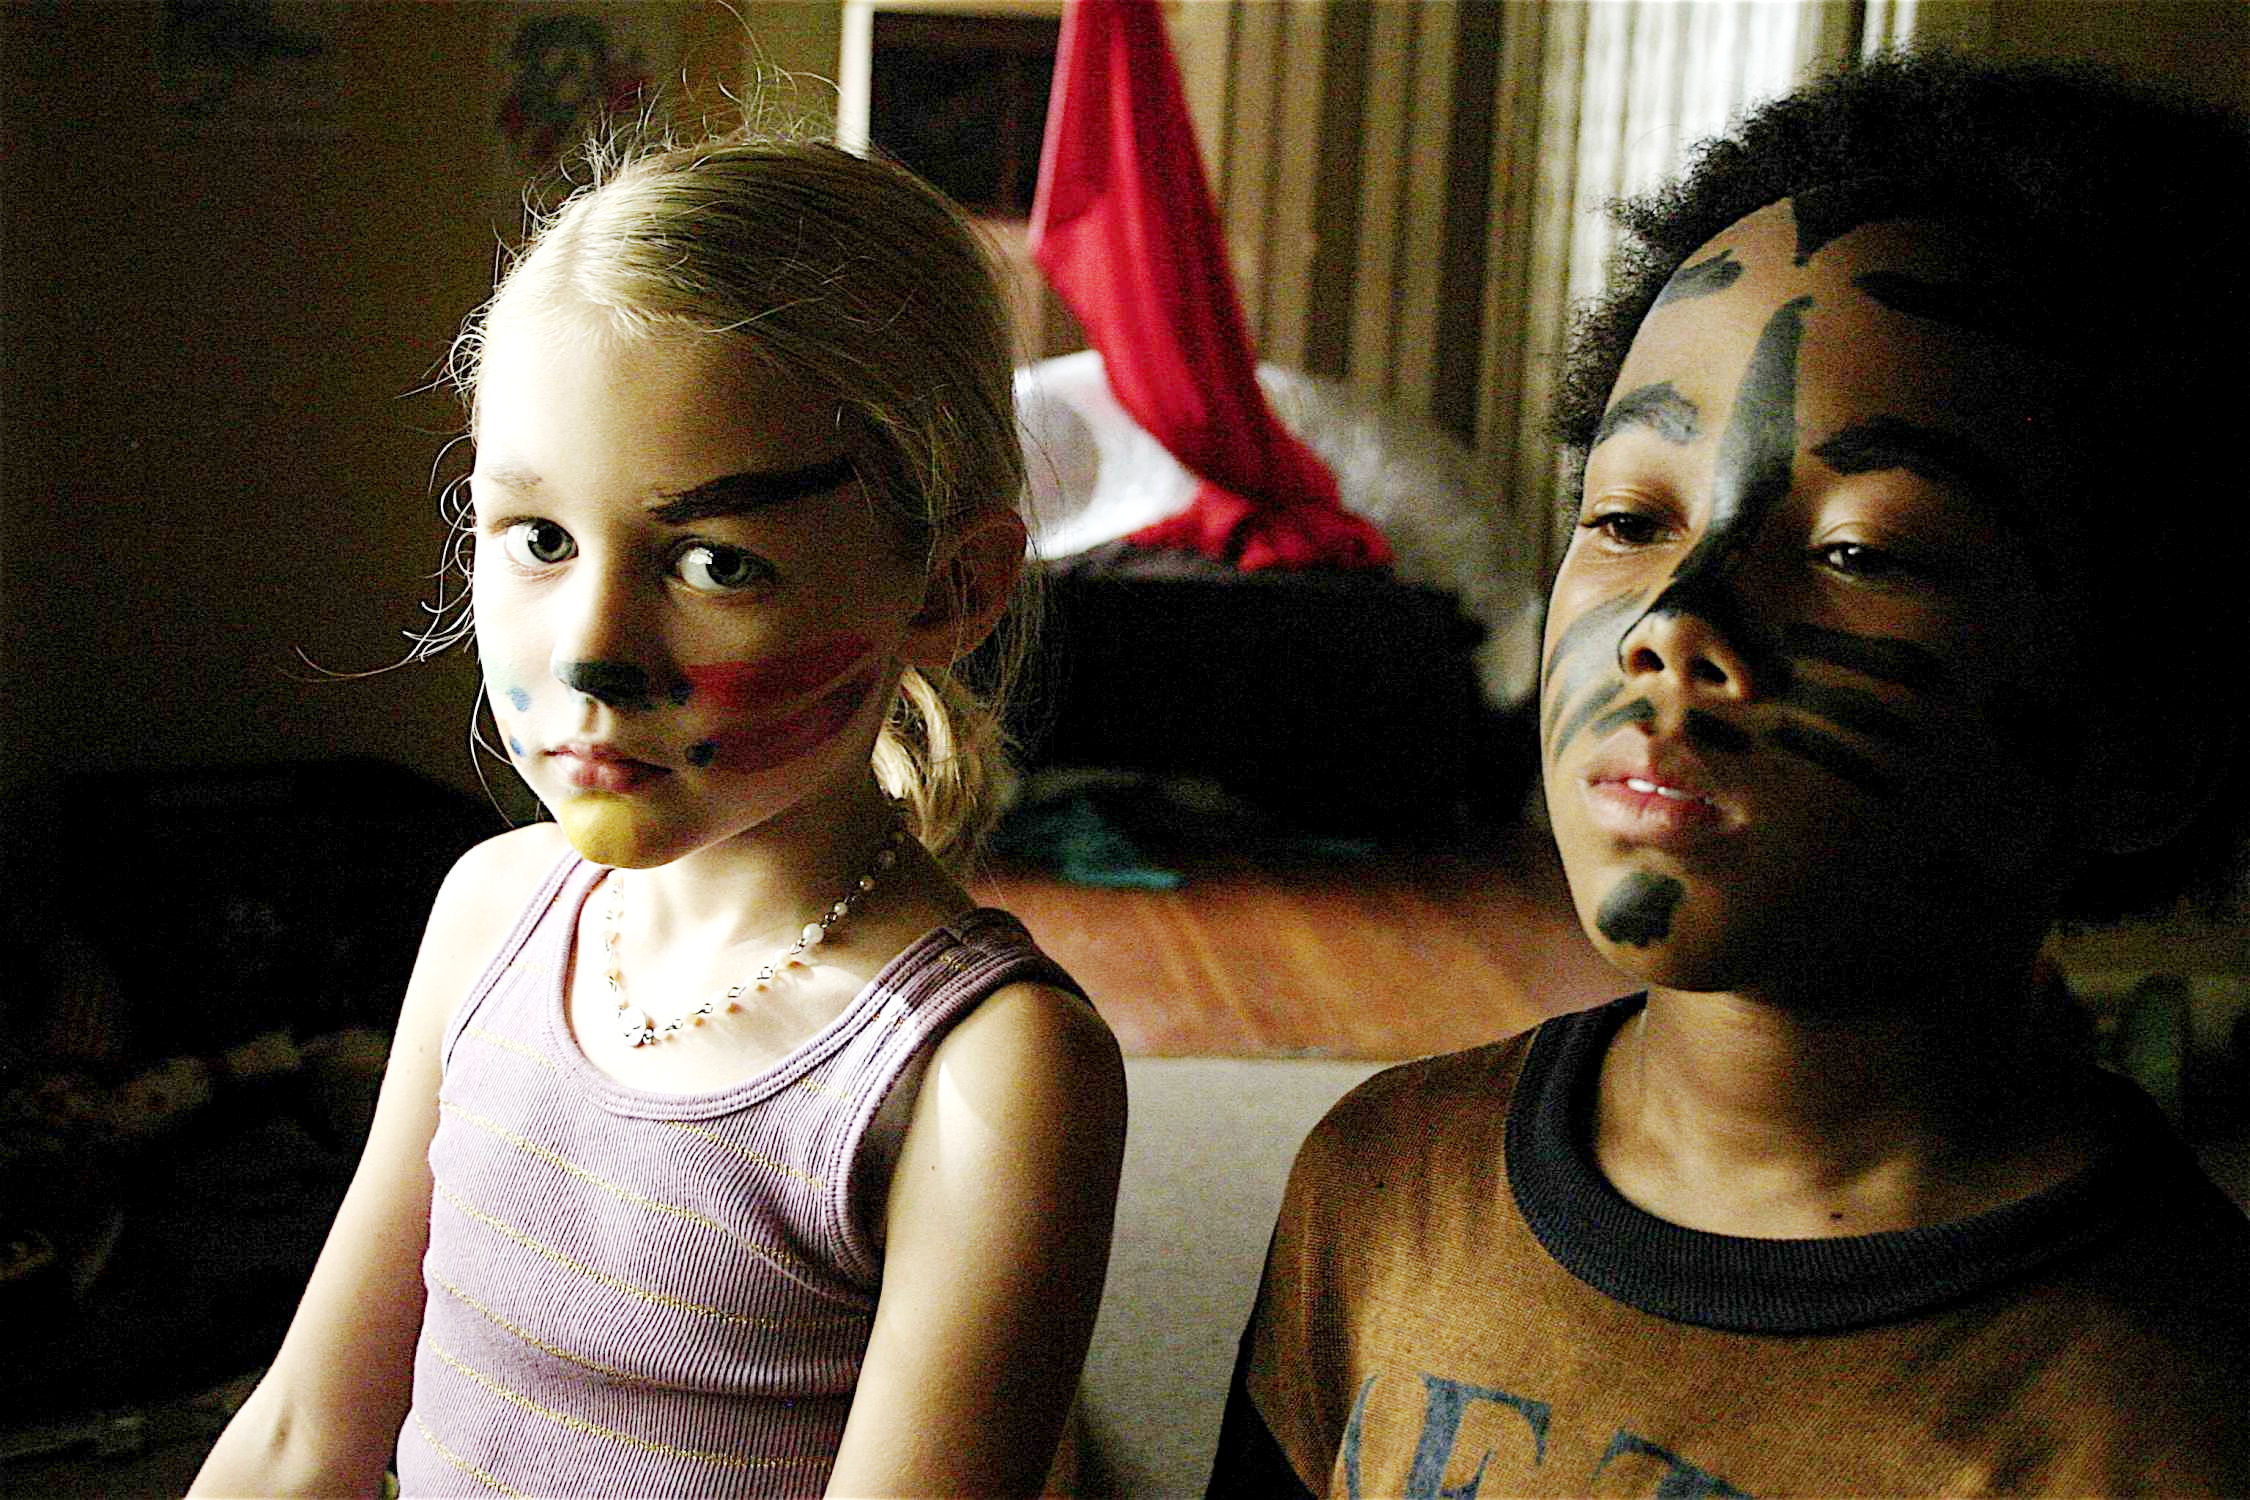 Ryan Simpkins stars as Young Leslie and Jermaine Scooter Smith stars as Young Donnie in City Lights Pictures' Gardens of the Night (2008)